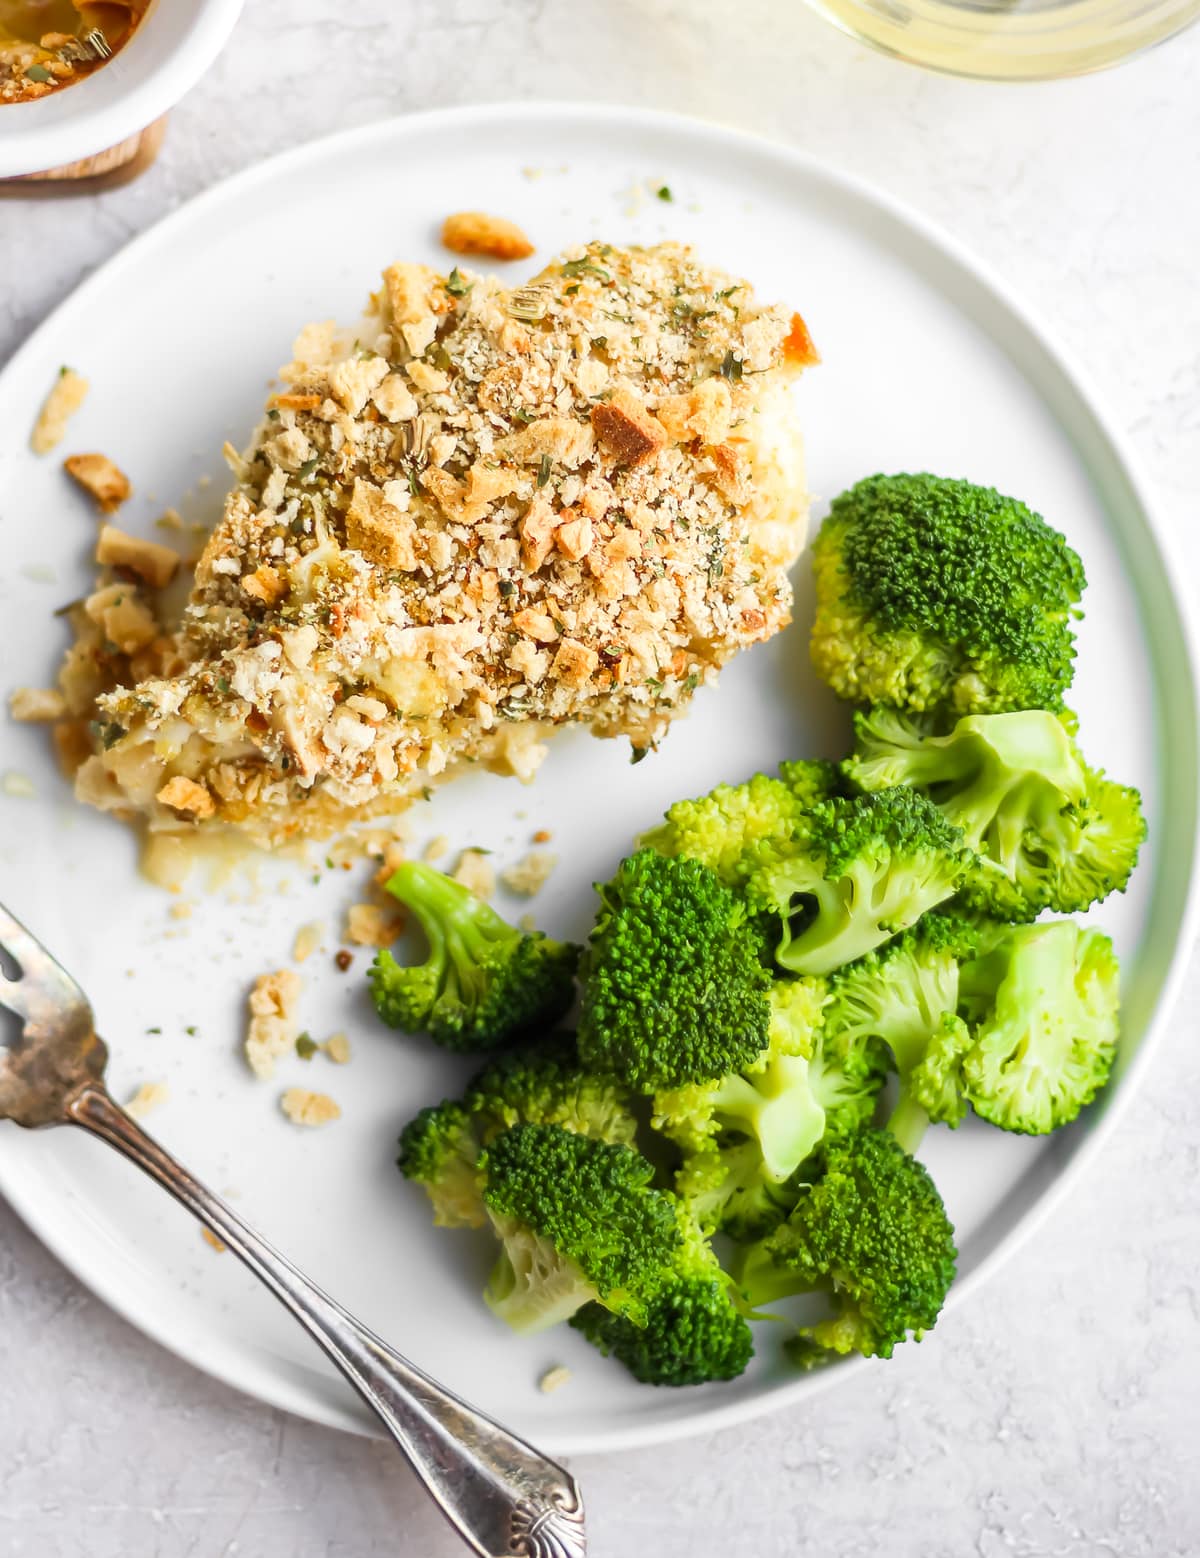 a piece of chicken on a plate with broccoli